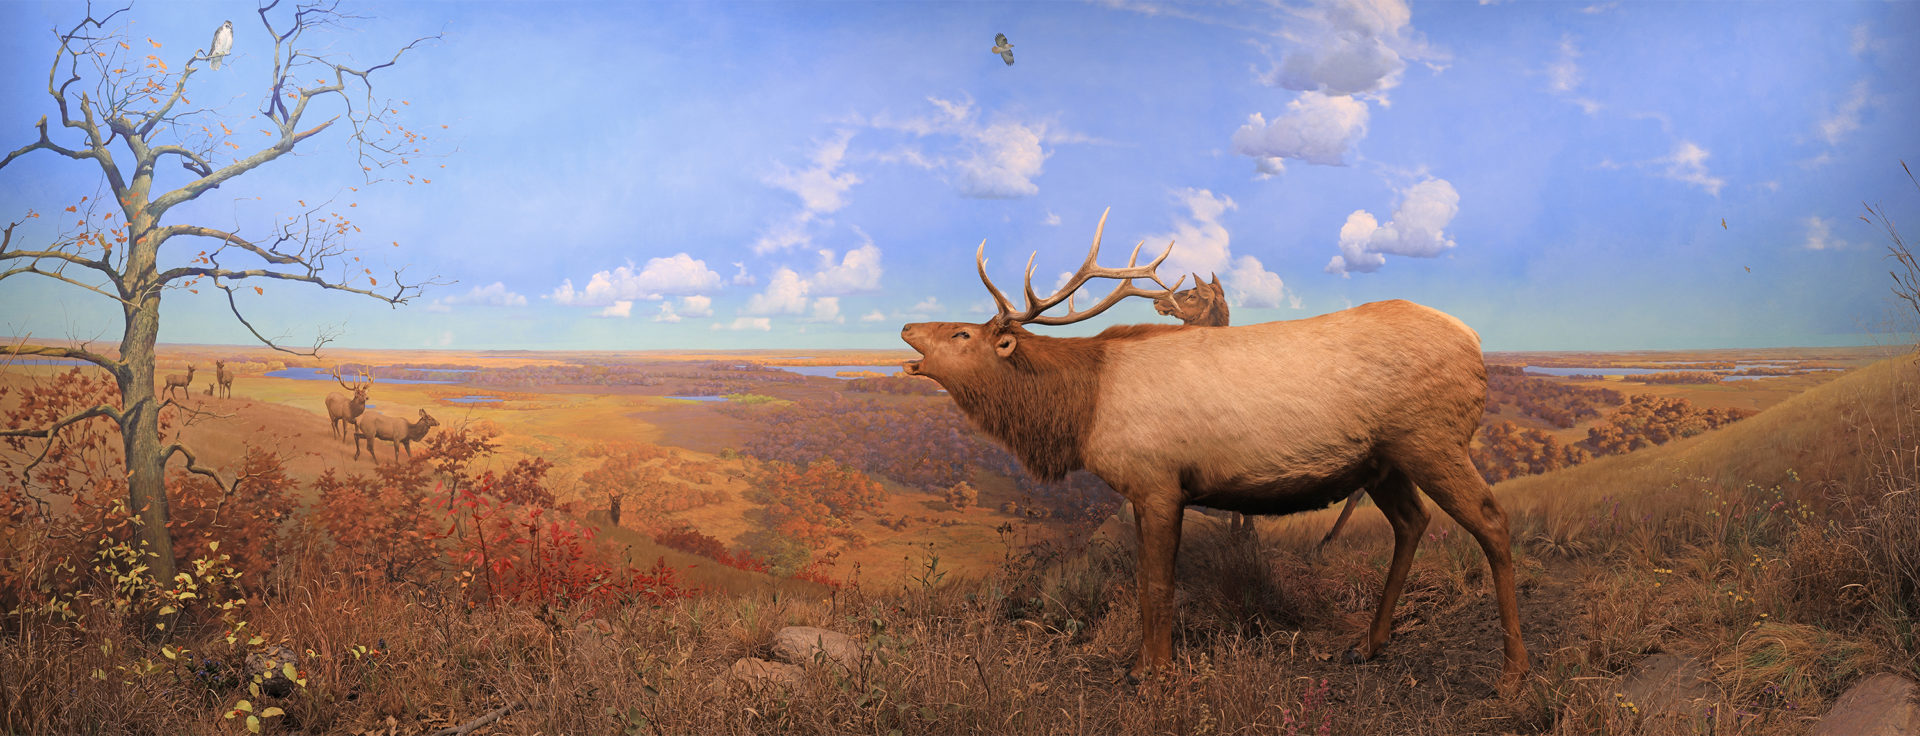 elk at inspiration point diorama, shows a herd of elk in a grassland in autumn